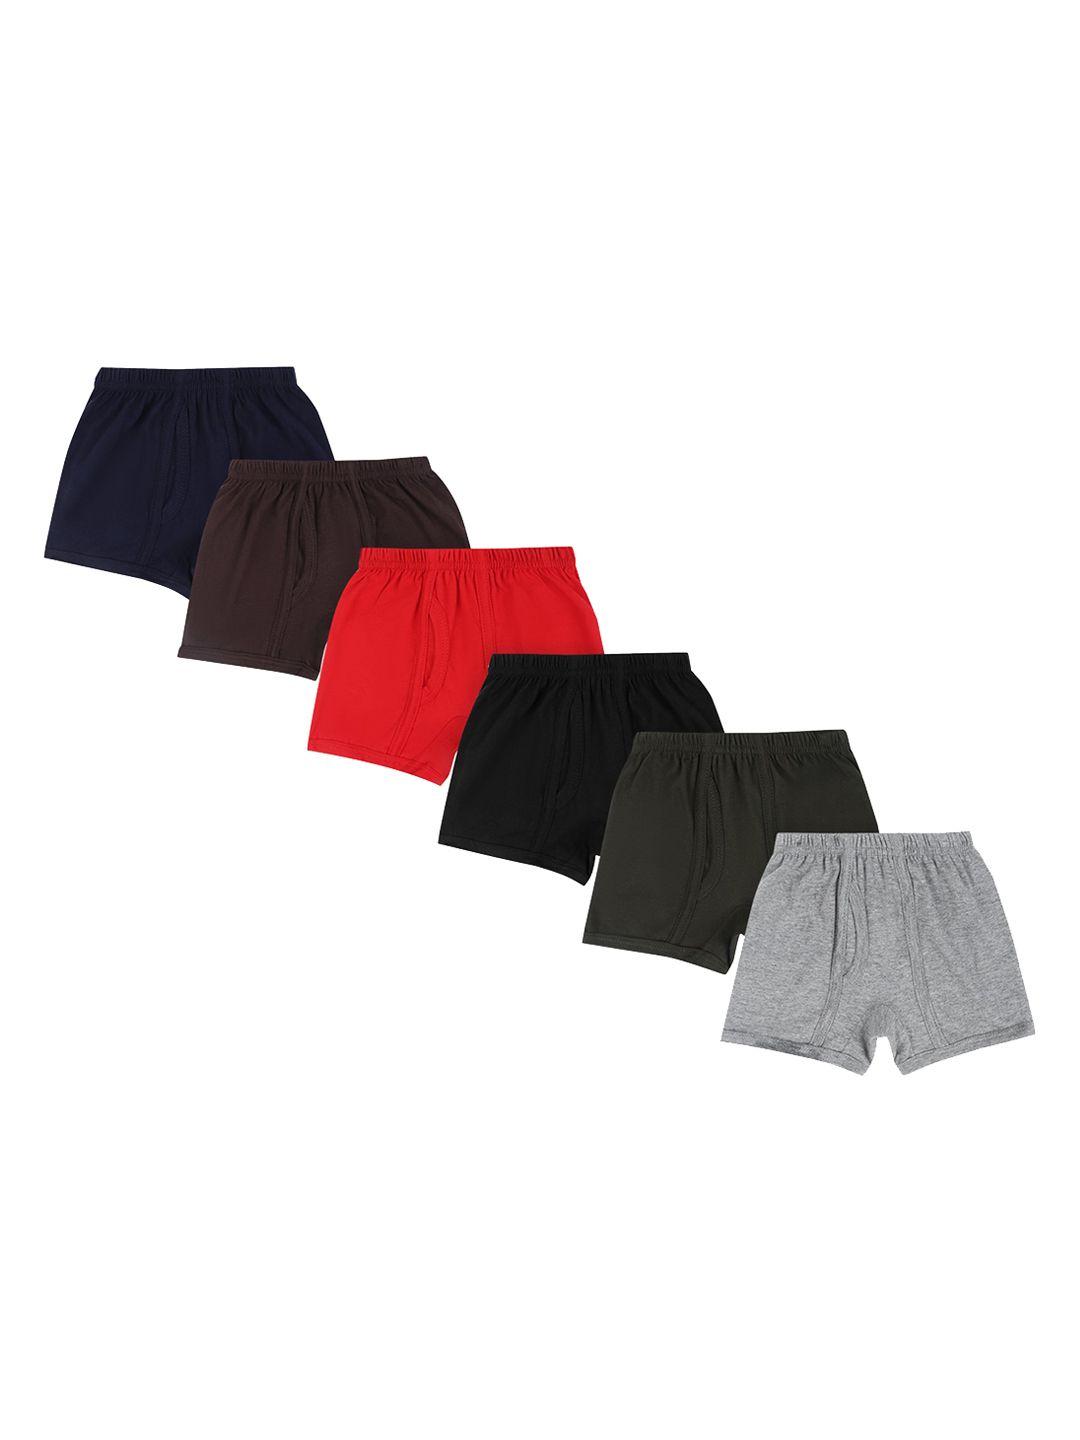 dyca-boys-pack-of-6-assorted-cotton-trunks